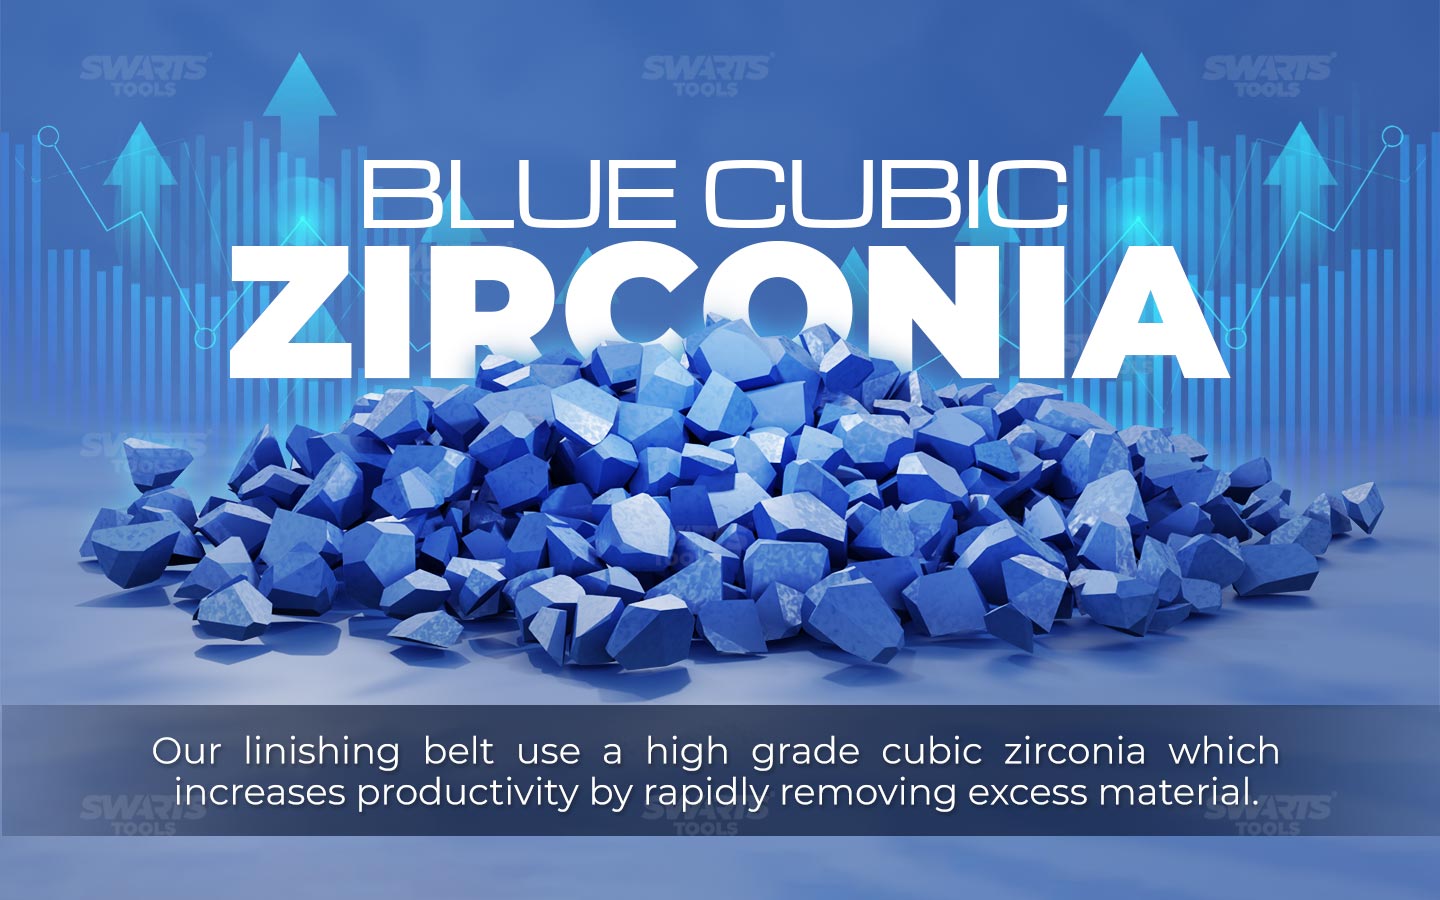 Blue cubic zirconia, our linishing belt use a high grade cubic zirconia which increases productivity by rapidly removing excess material